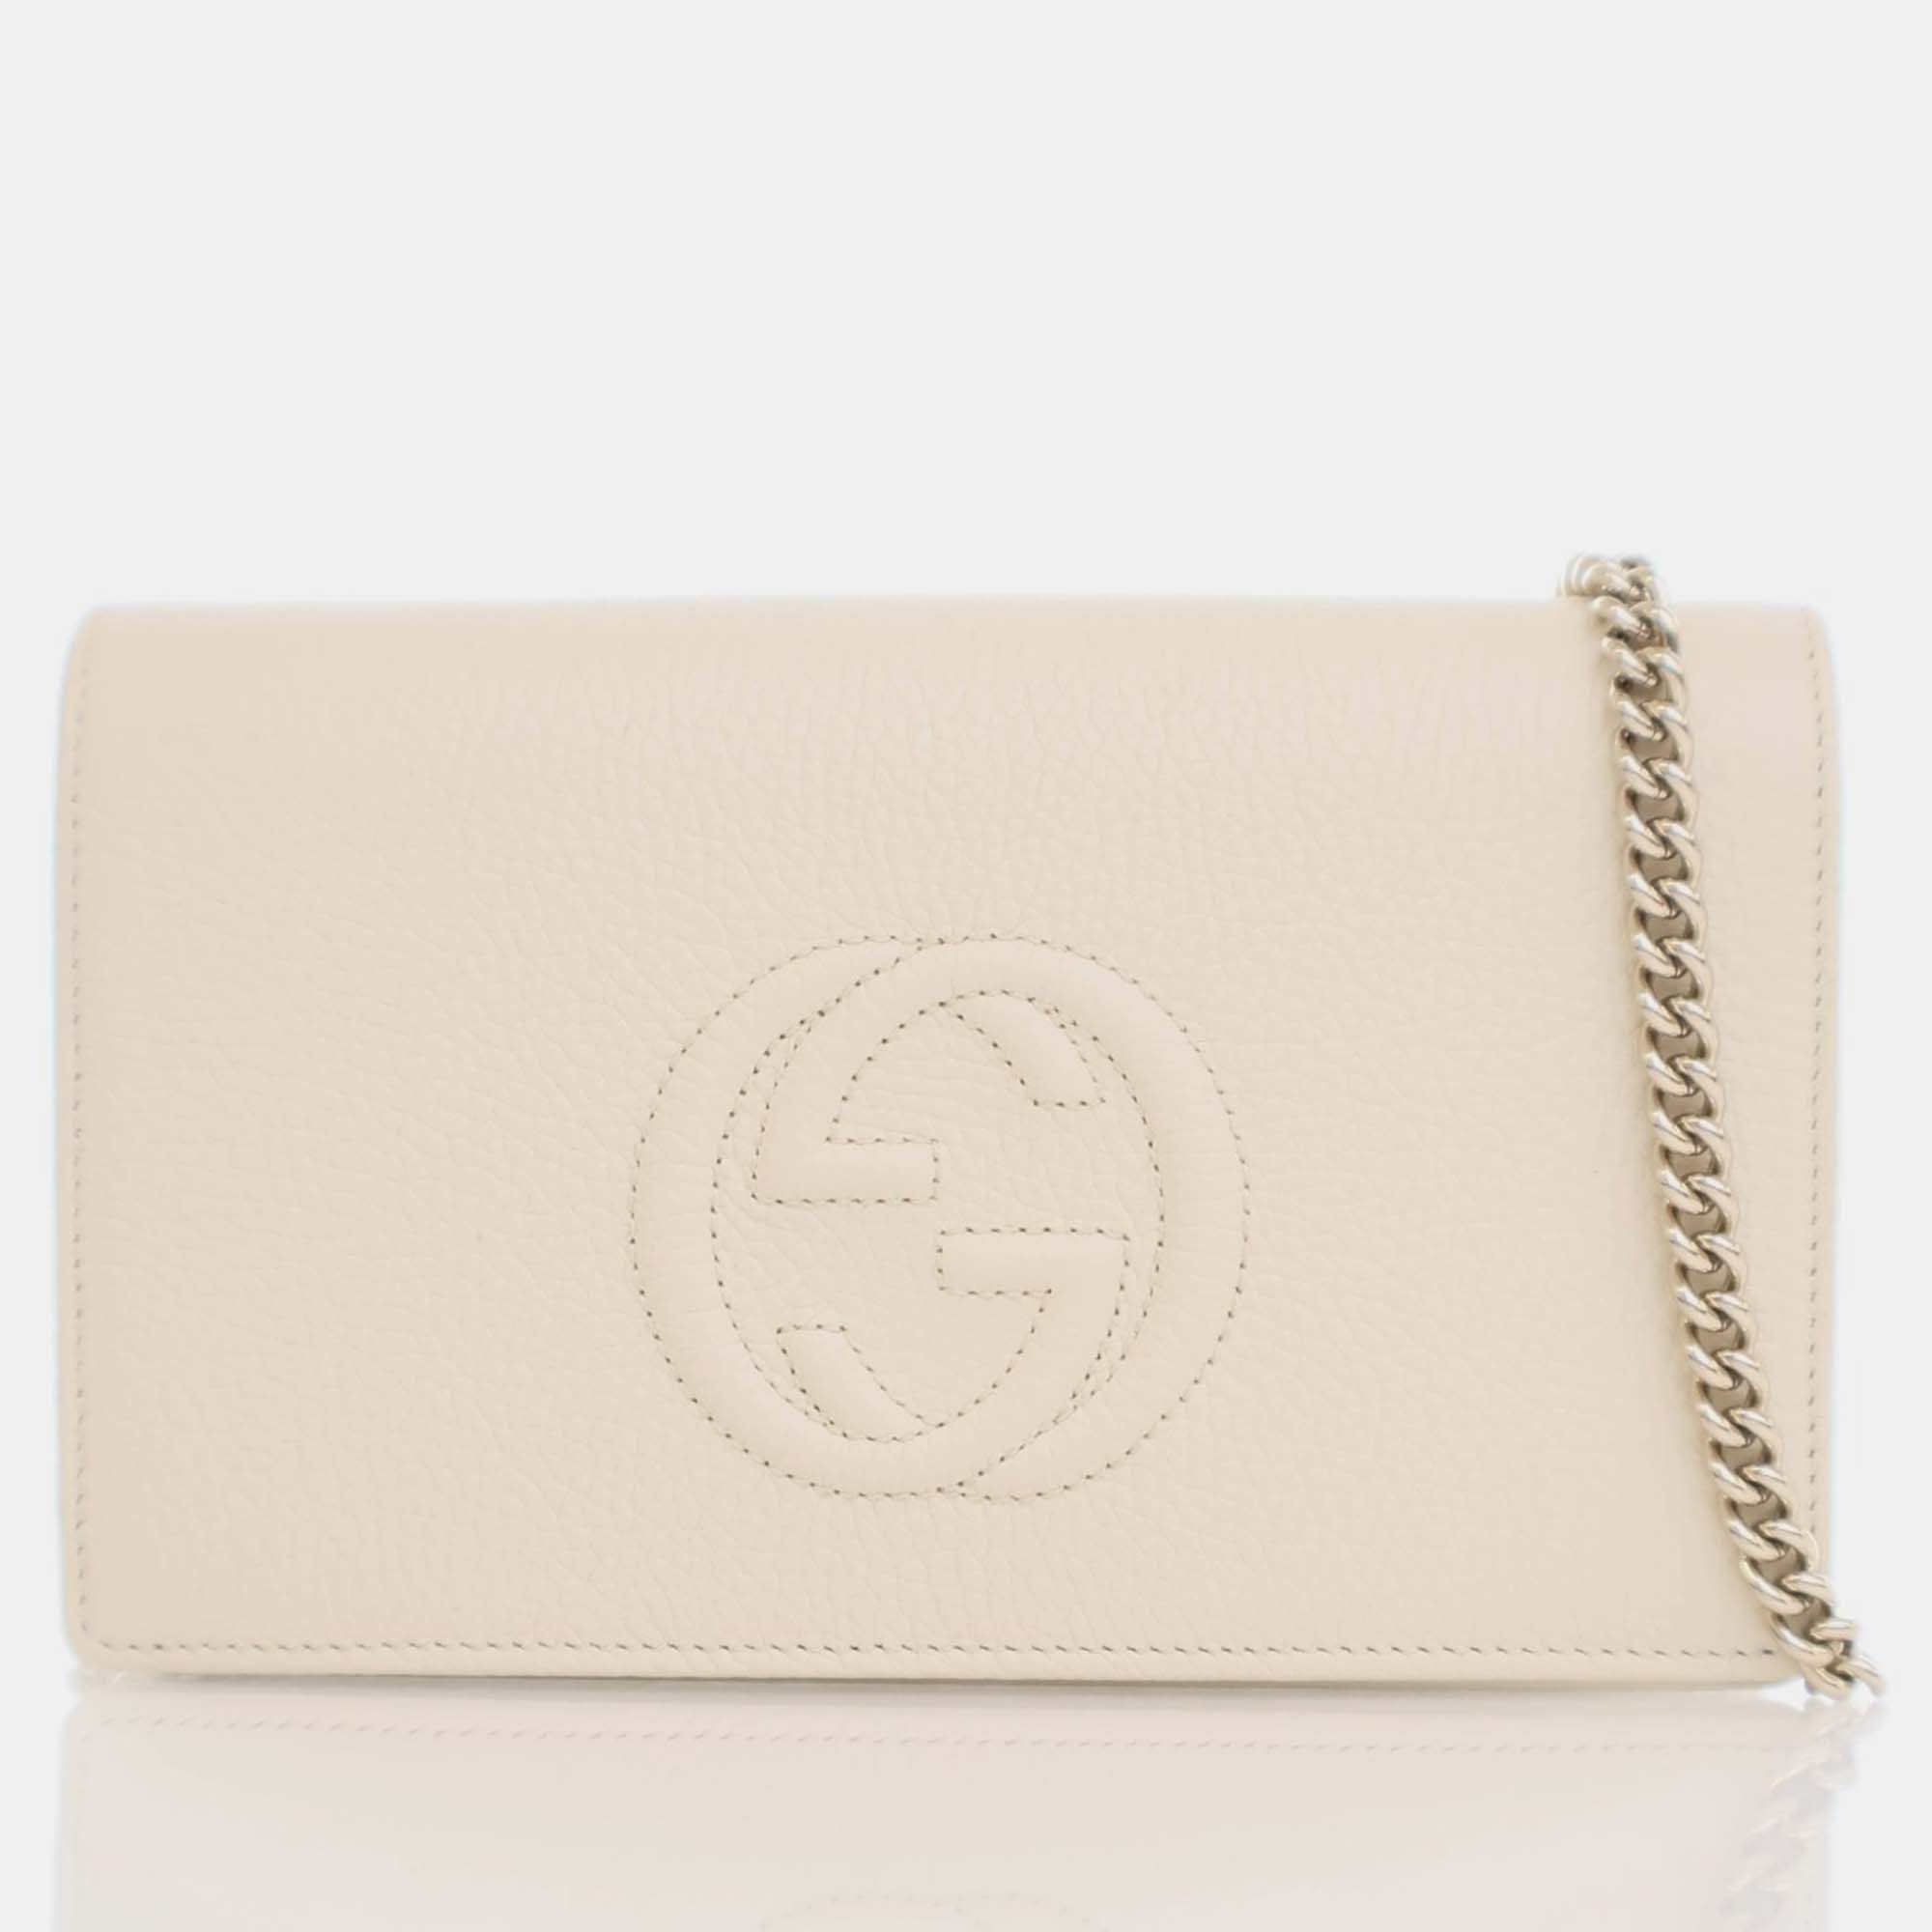 Gucci white calfskin leather  soho wallet on chain